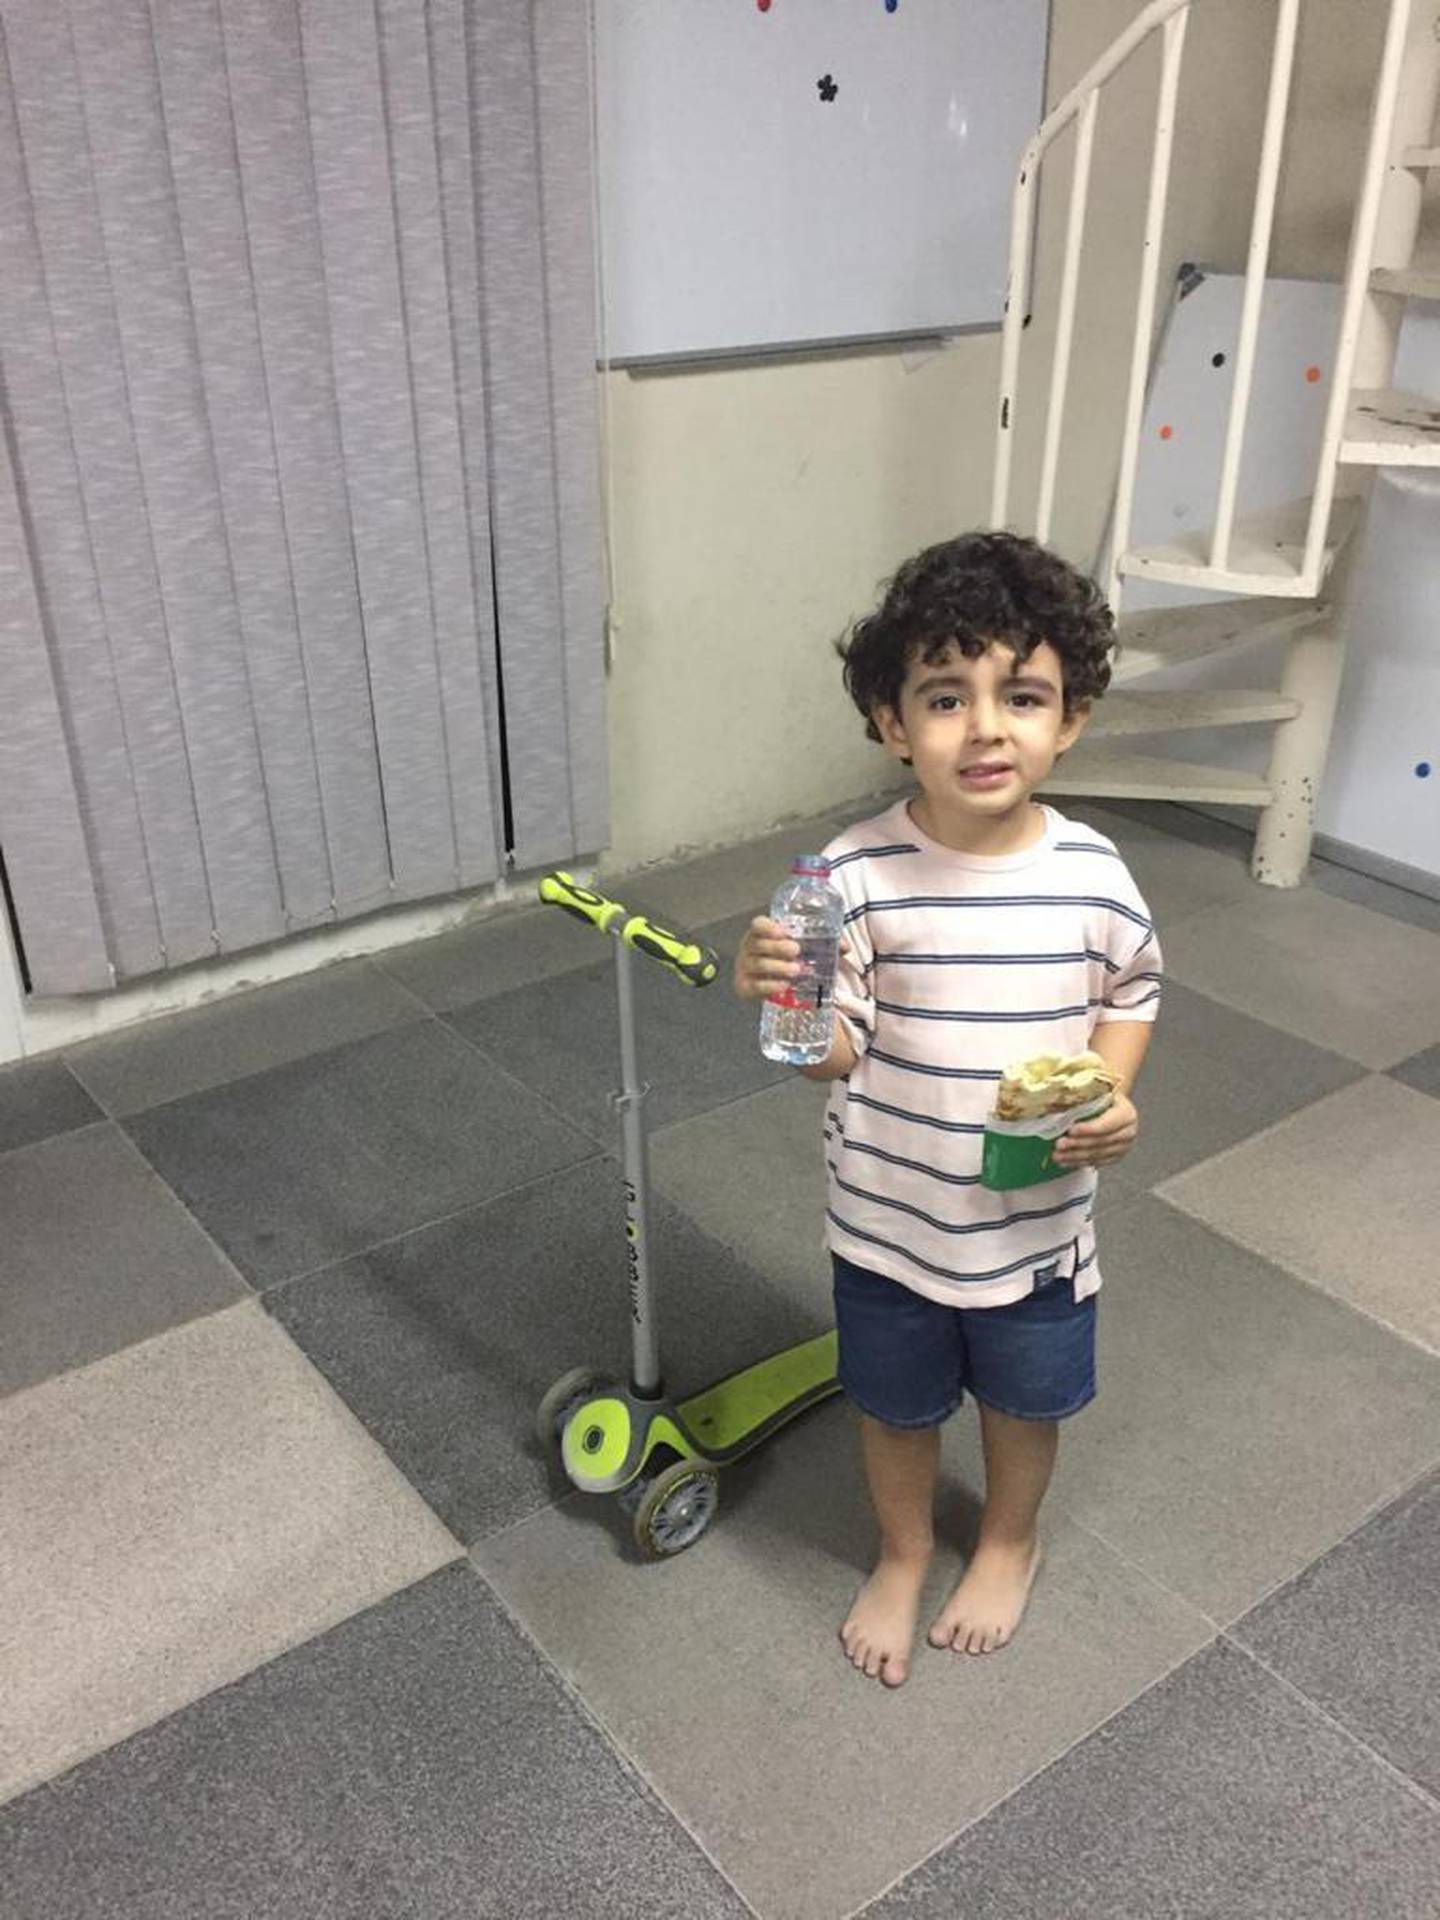 The boy rode away on his kick scooter and was found in Umm Suqeim 2 after a 40-minute search.